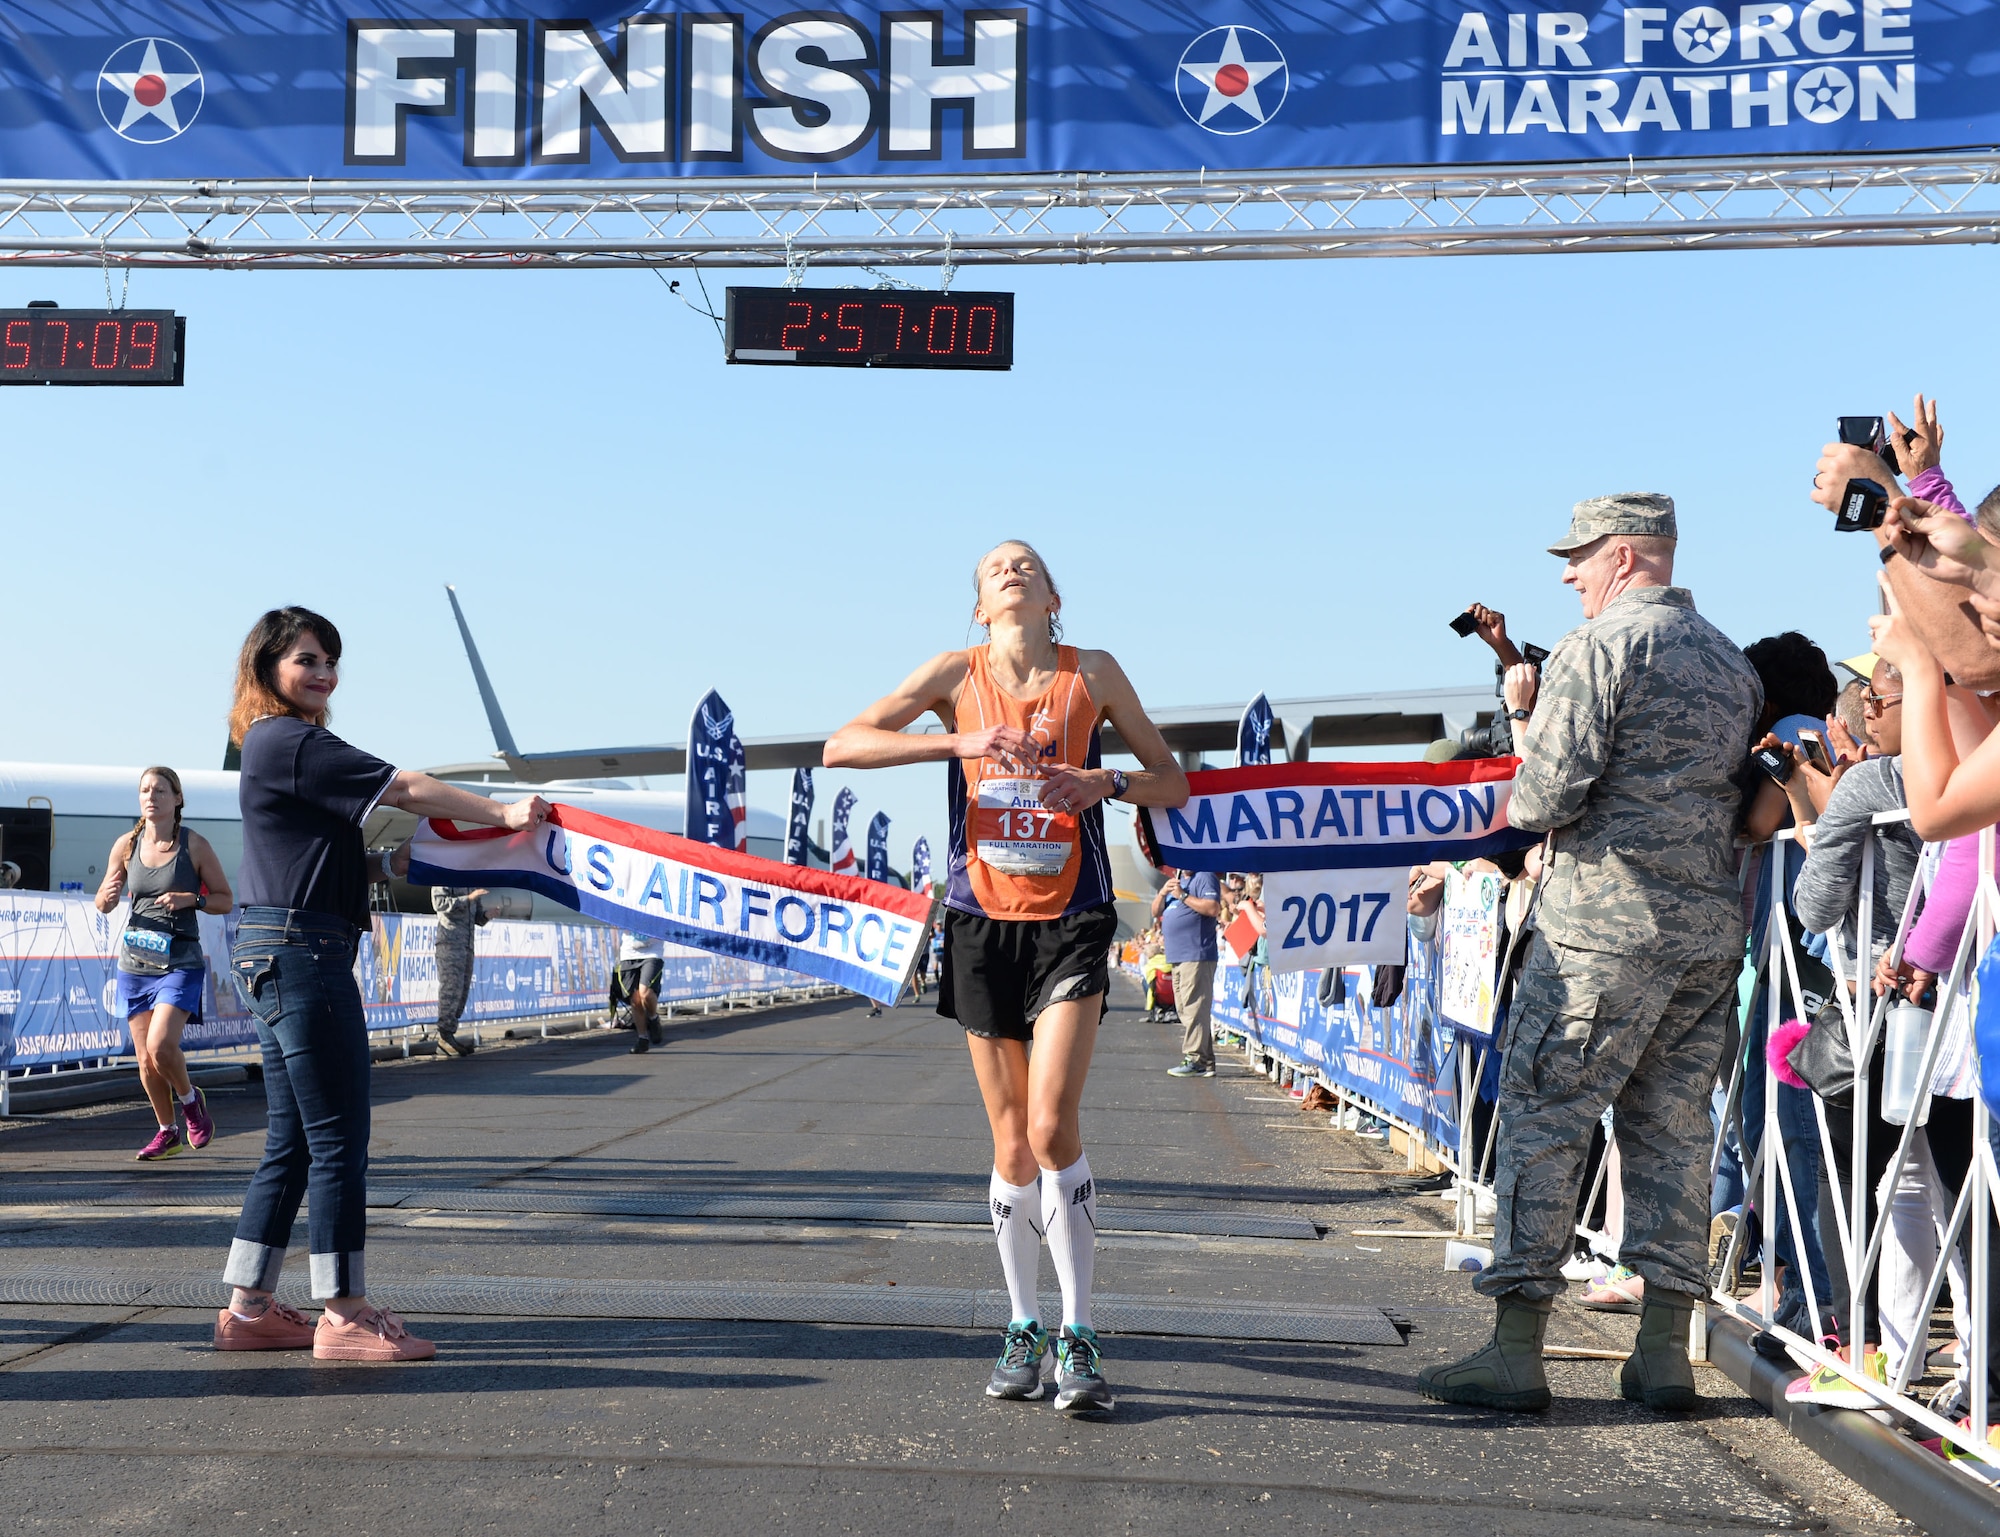 Ann Alyanak crosses the finish line as the overall women's winner of the full marathon at the 21st running of the 2017 U.S. Air Force Marathon at Wright-Patterson Air Force Base on Sept. 16. Alyanak, from Bellbrook, Ohio, finished with a time of 2:56:57. (U.S. Air Force photo / Wesley Farnsworth)